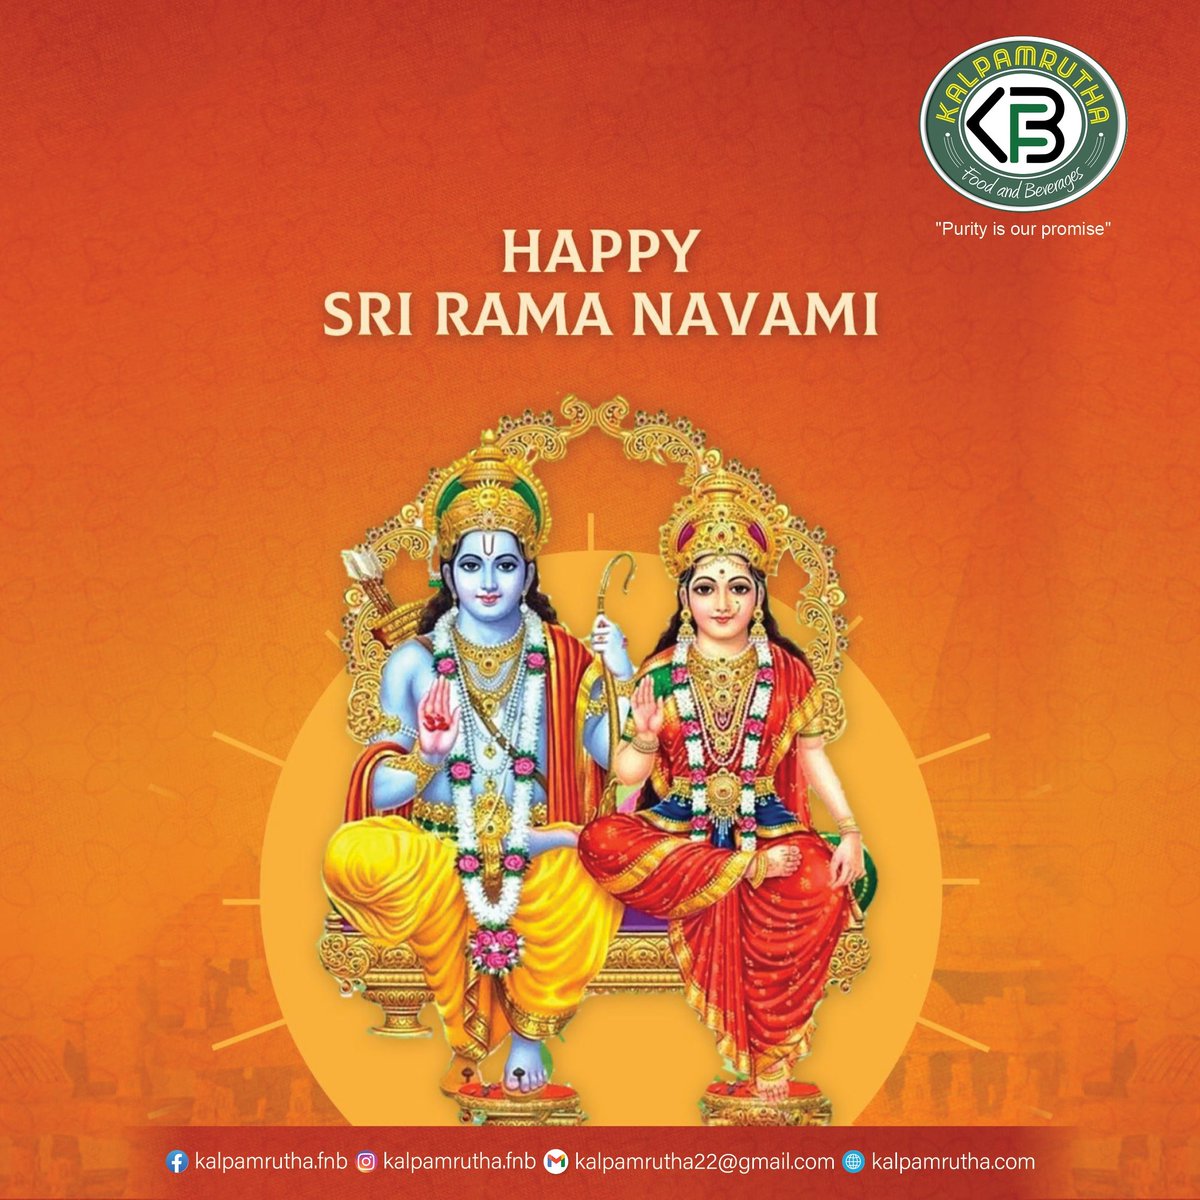 Wishing you a blessed Rama Navami! May this auspicious day bring joy and the purest blessings to your home. 

#Kalpamrutha #PurityIsOurPromise #RamaNavami #ColdPressedOils #KalpamruthaFood #kalpamruthaproducts #kalpamruthawoodpressed #KalpamruthaCelebrates #KalpamruthaEssence